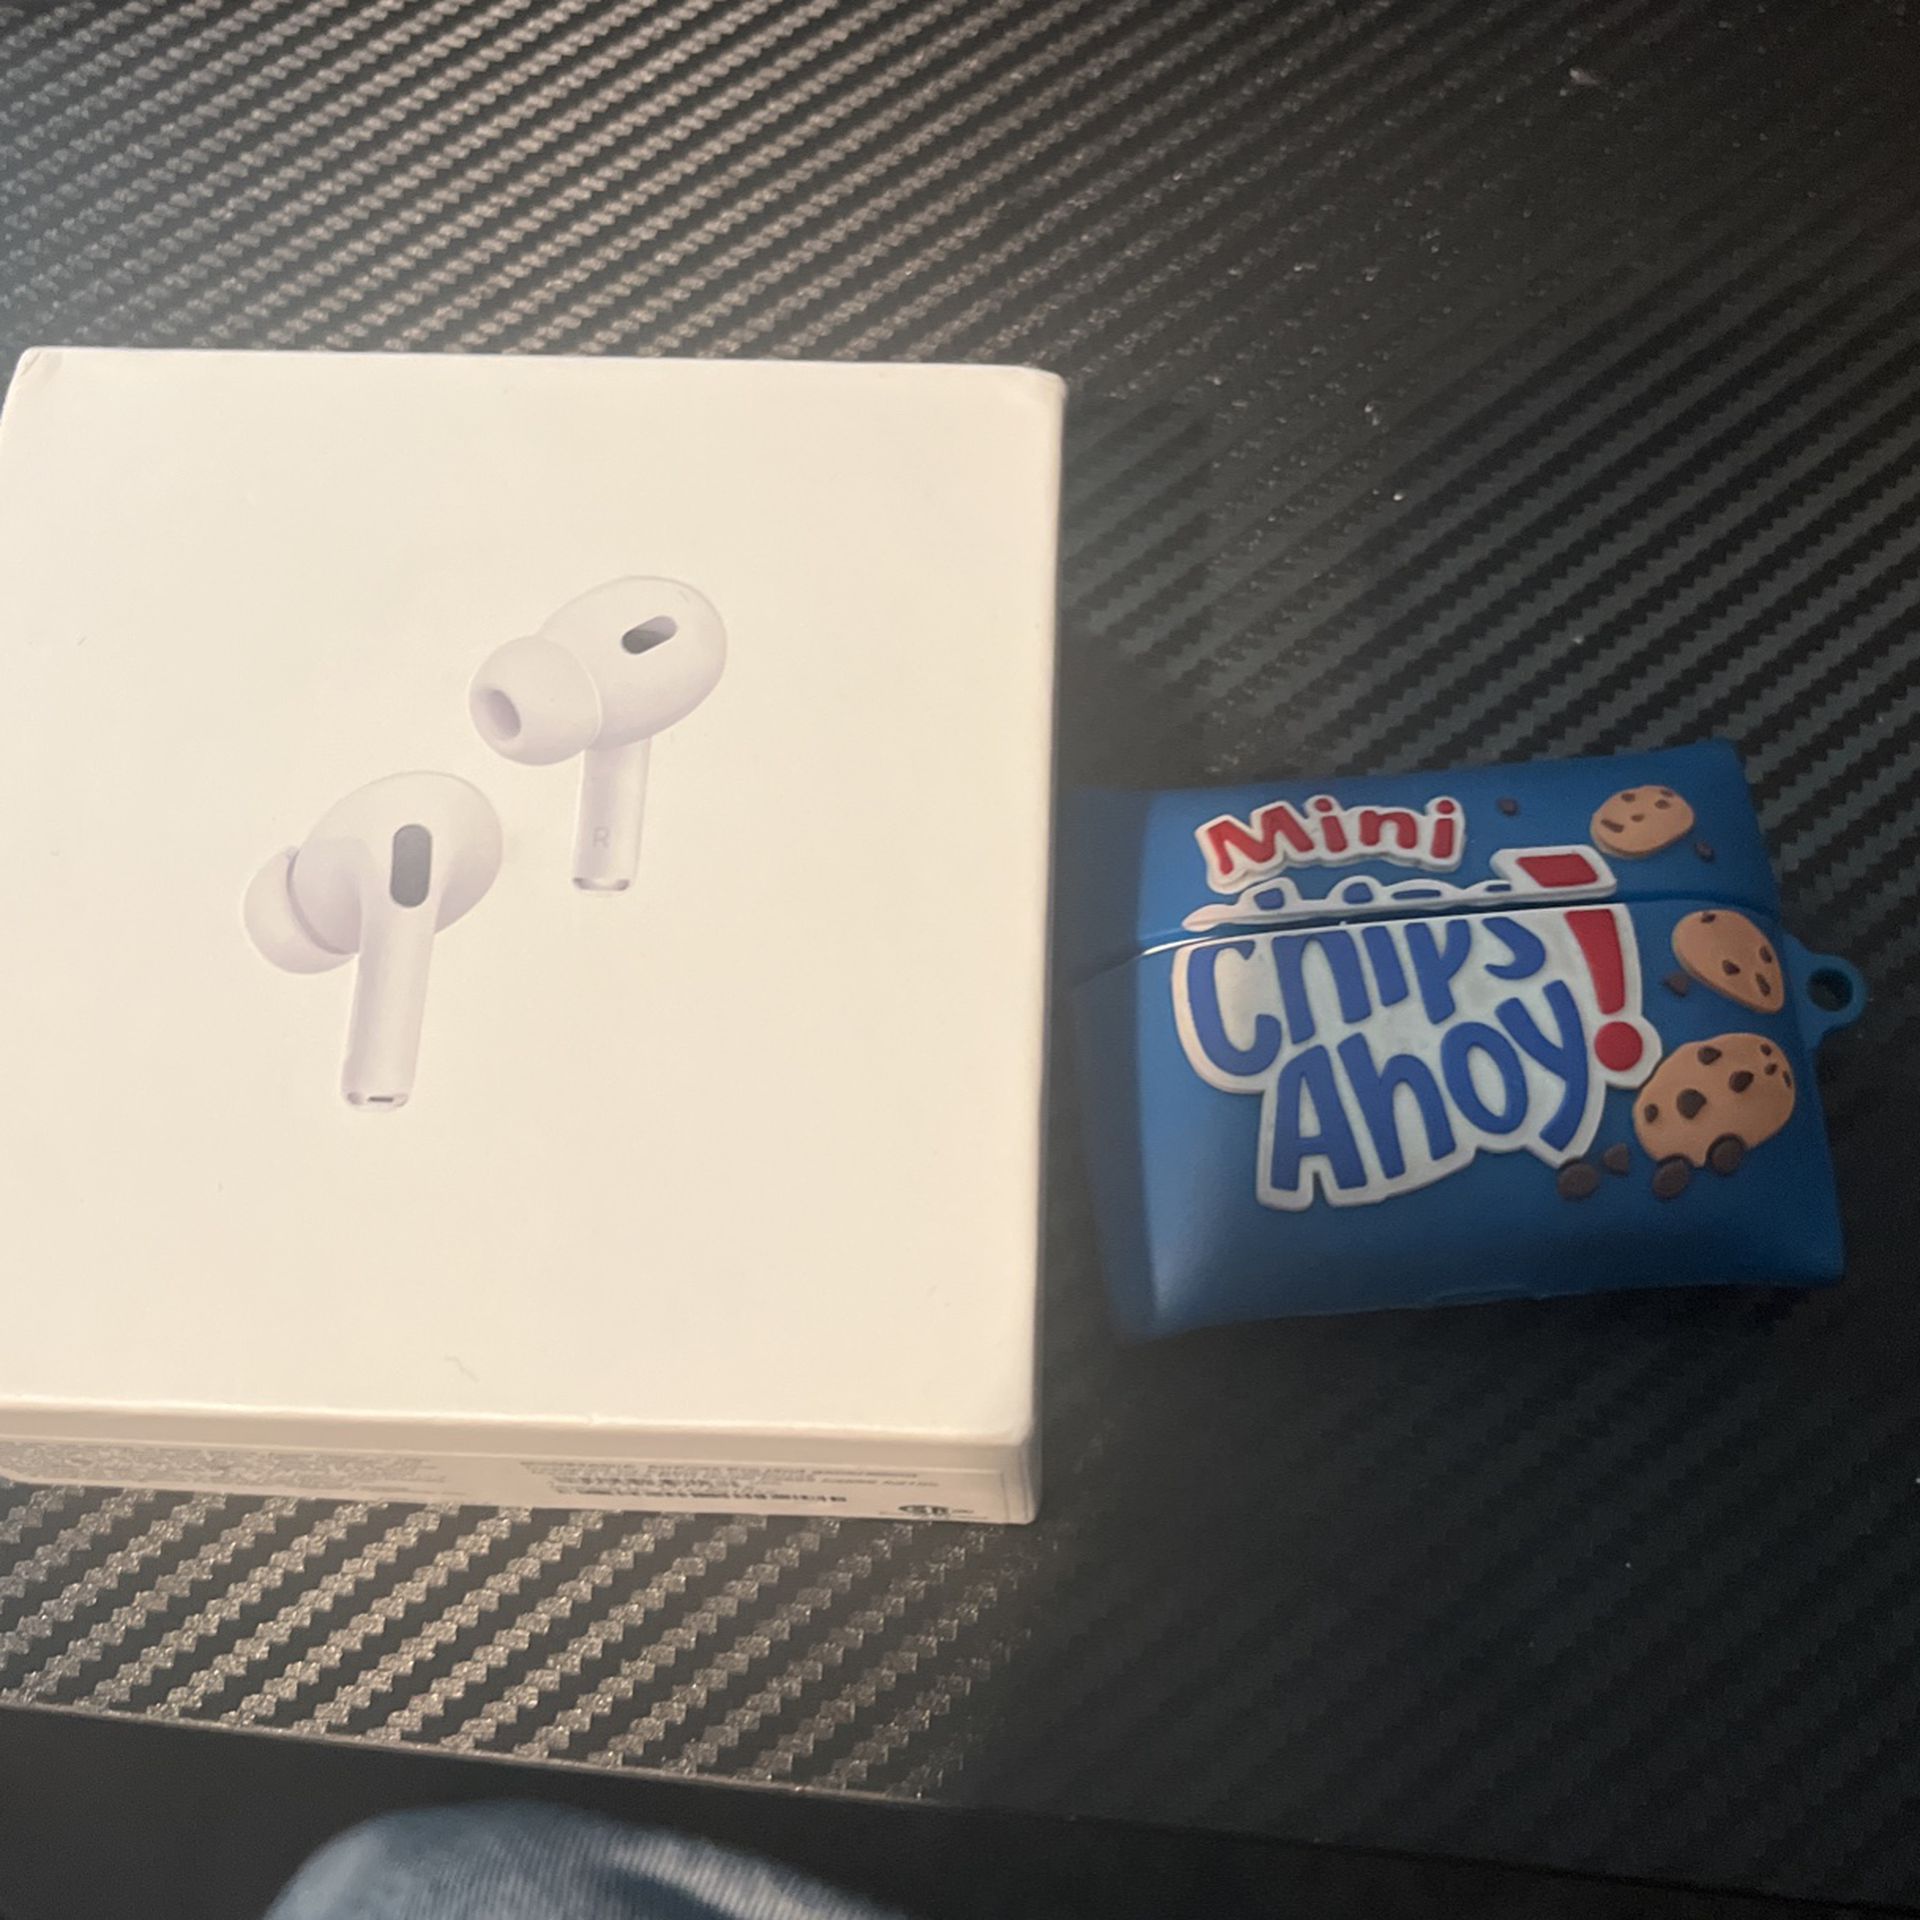 AirPod Pro Chips Ahoy Case